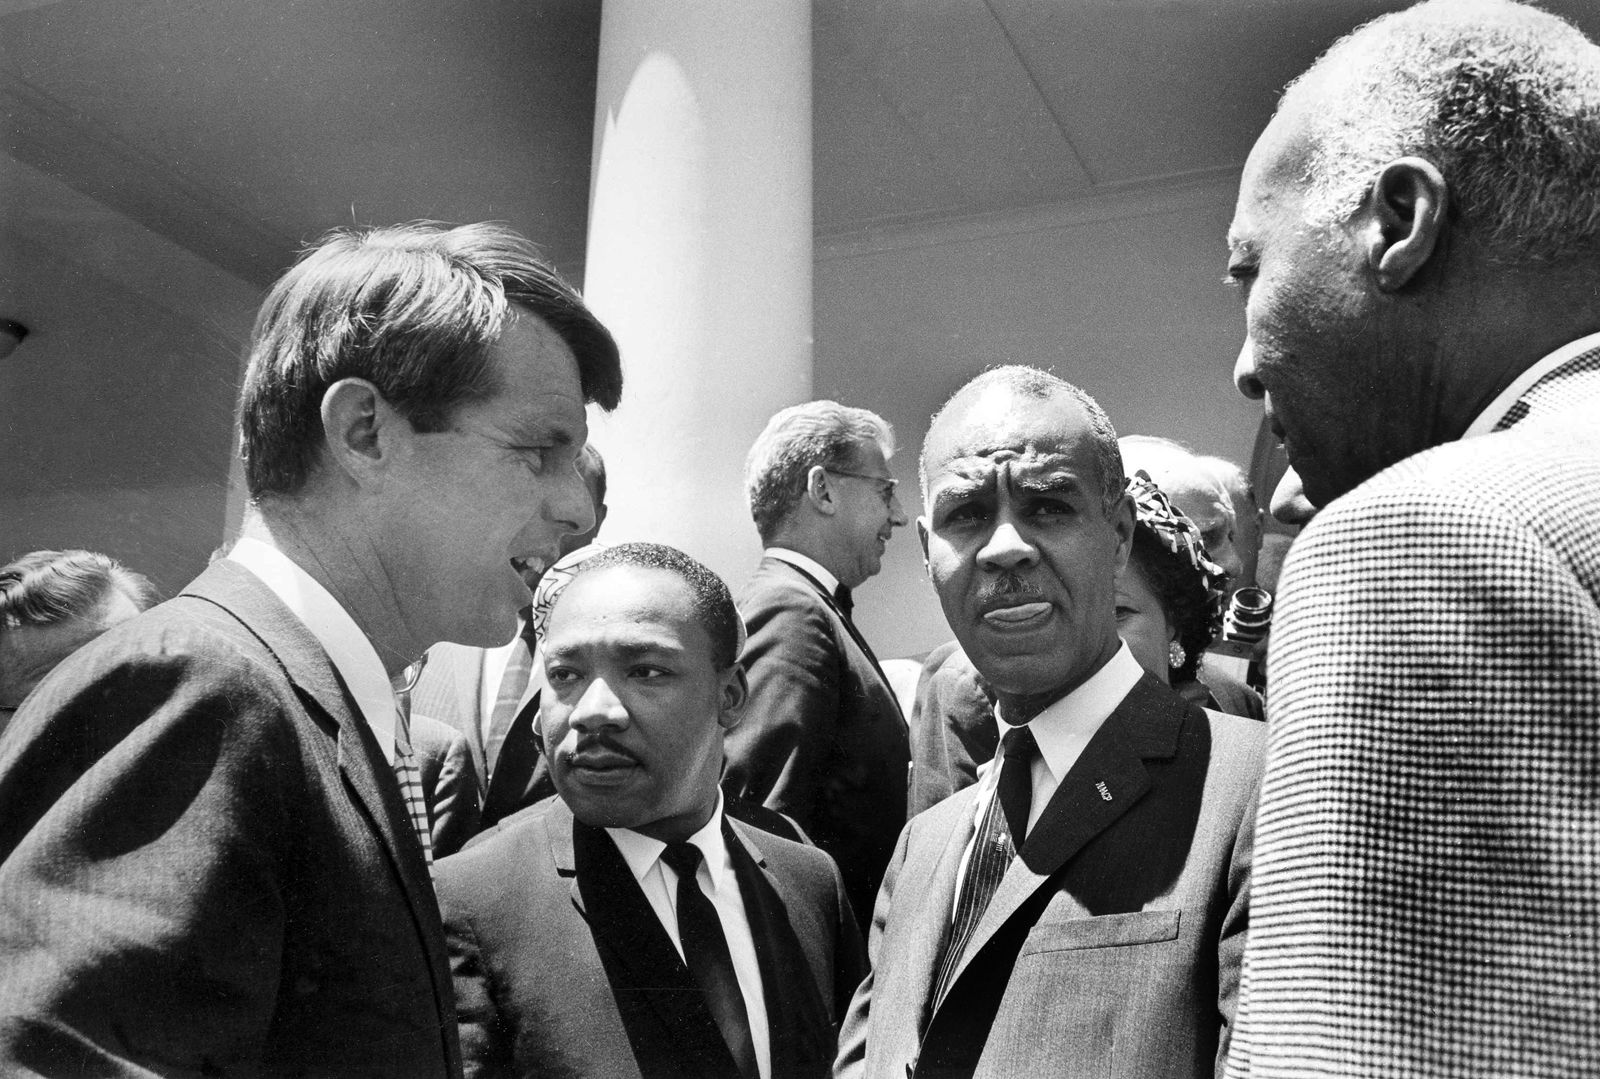 Attorney General Robert F. Kennedy talks with civil rights leaders on the White House grounds, June 22, 1963. From left: Kennedy; Rev. Martin Luther King, head of the Southern Christian Leadership Conference; Roy Wilkins, executive secretary of the NAACP, and A. Phillip Randolph, president, Brotherhood of Sleeping Car Porters. Joseph Rauh, civil rights lawyer, is in background at center. (AP Photo/Bob Schutz)